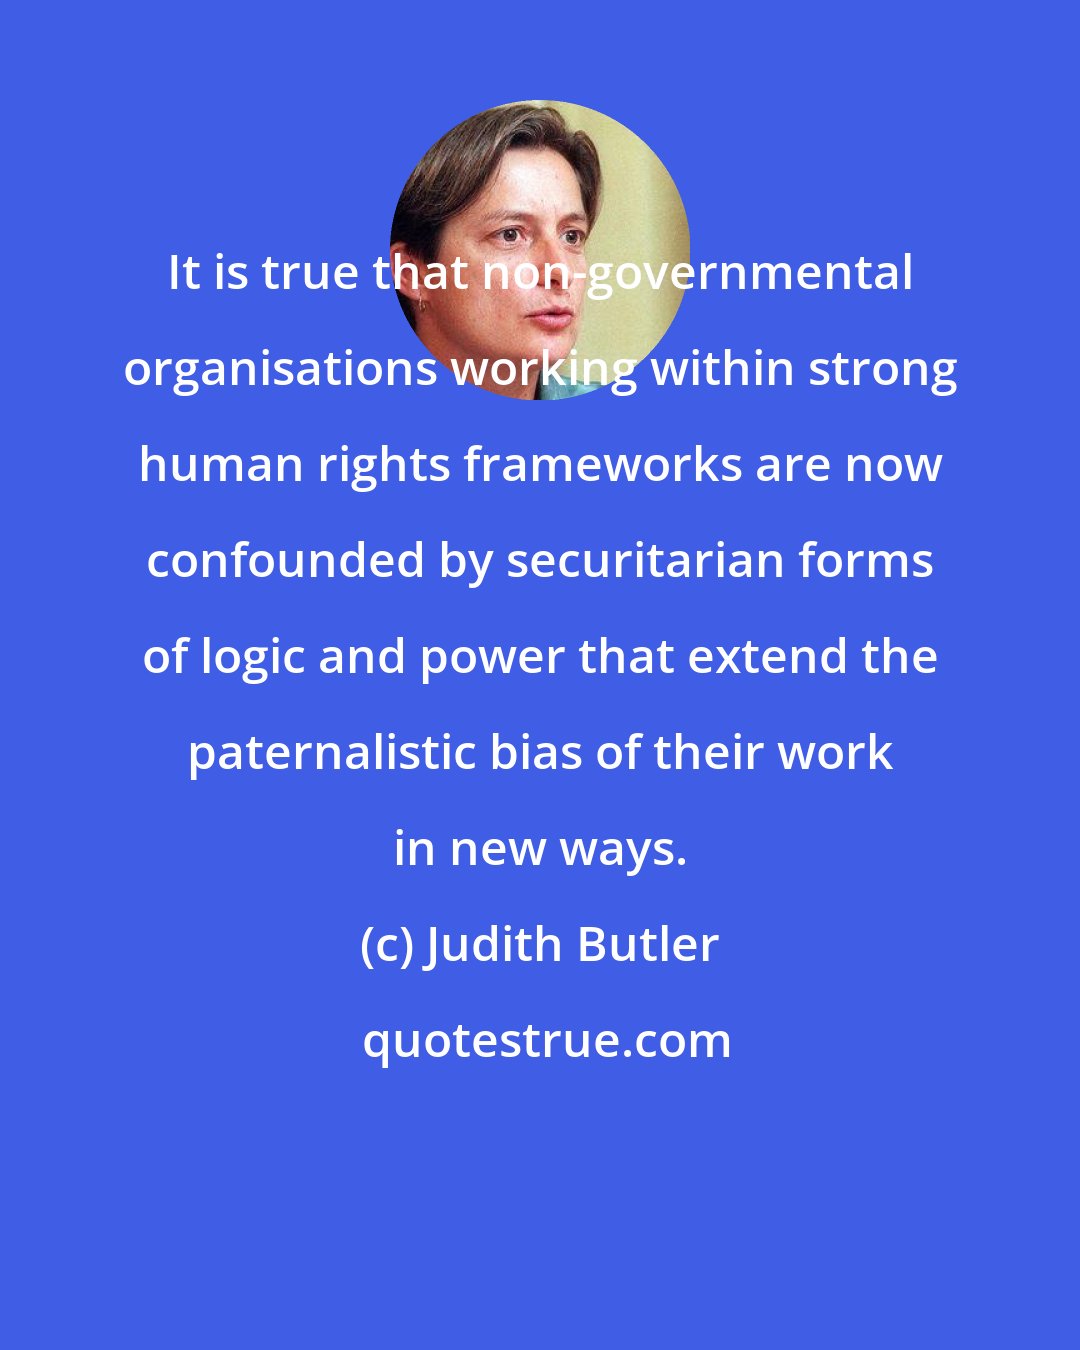 Judith Butler: It is true that non-governmental organisations working within strong human rights frameworks are now confounded by securitarian forms of logic and power that extend the paternalistic bias of their work in new ways.